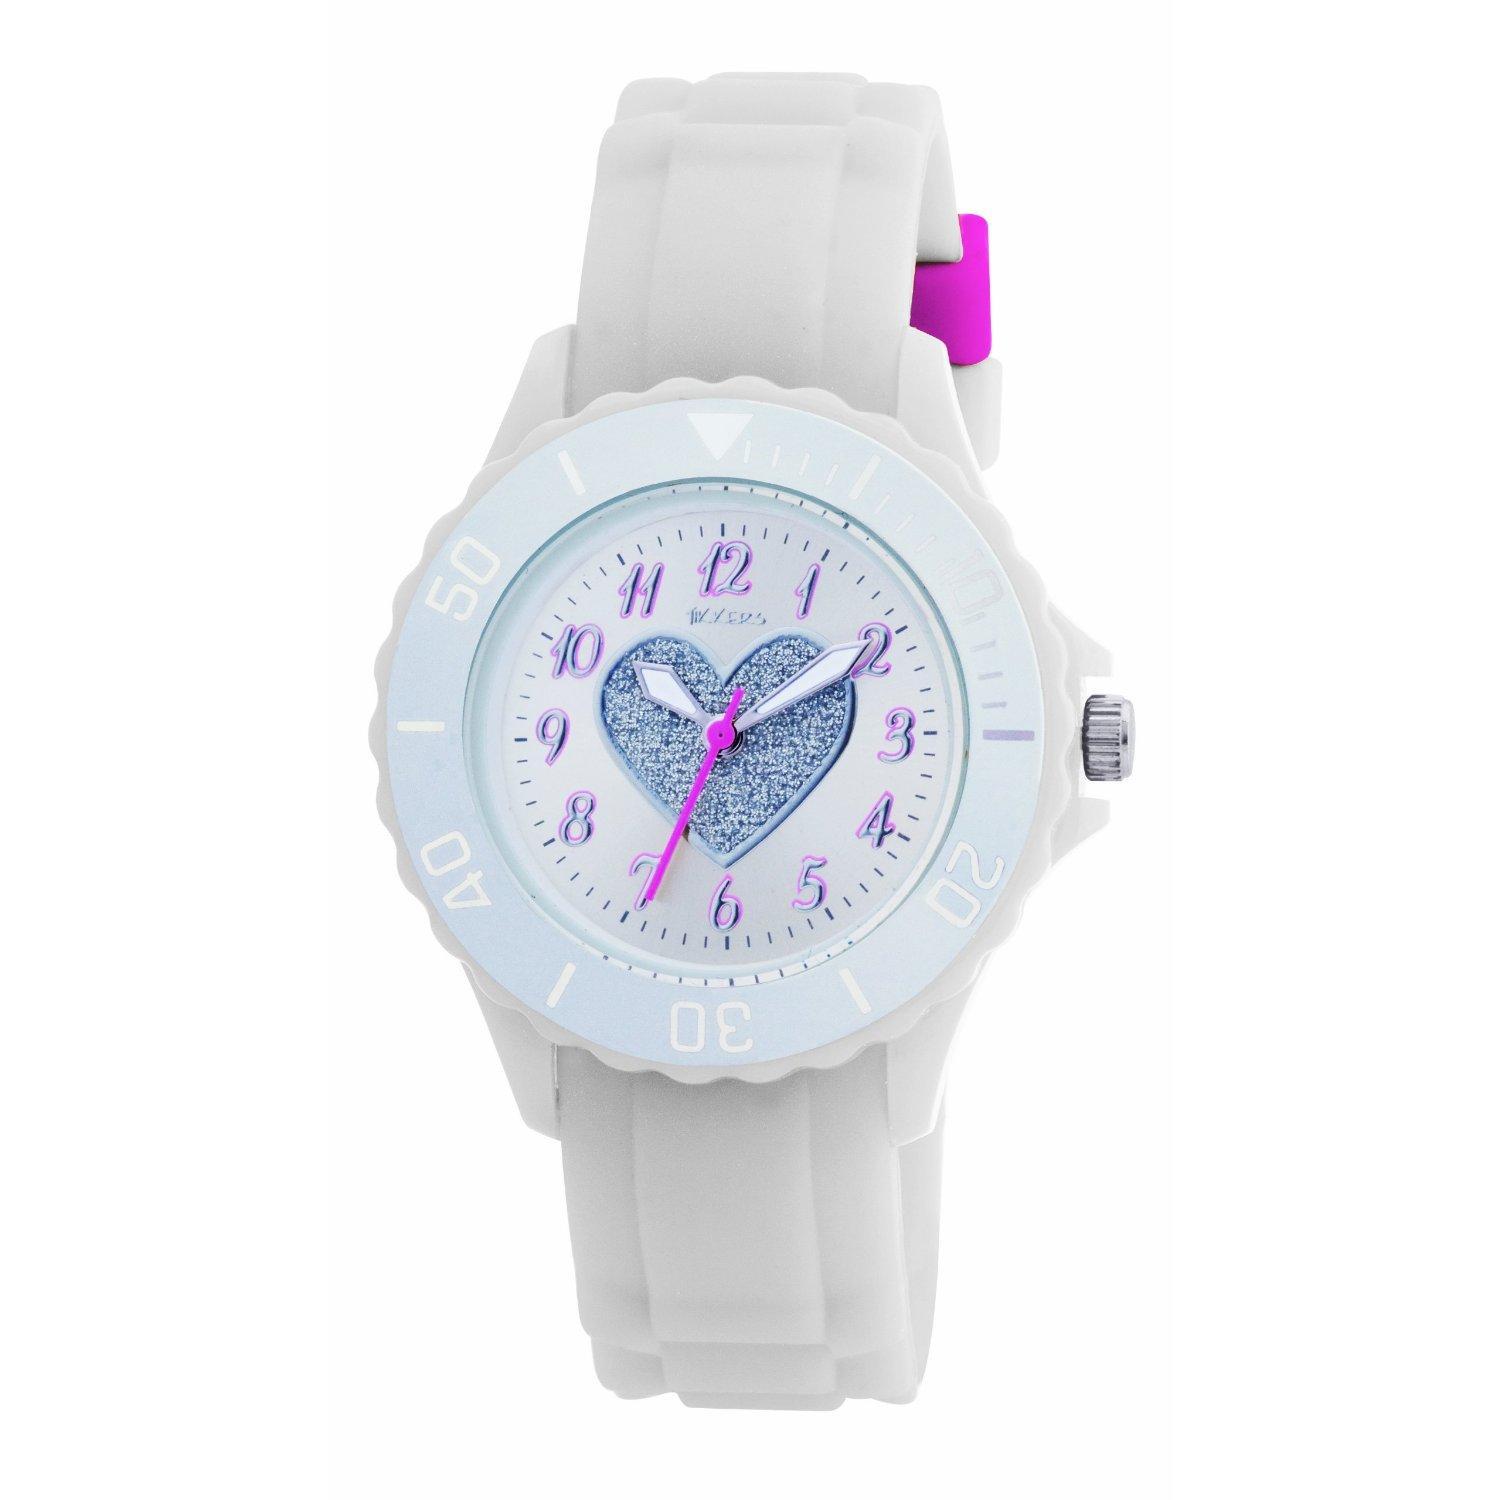 Foto Tikkers TK0034 Girls White Rubber/Silicone Strap Watch with Glitte ... foto 881747